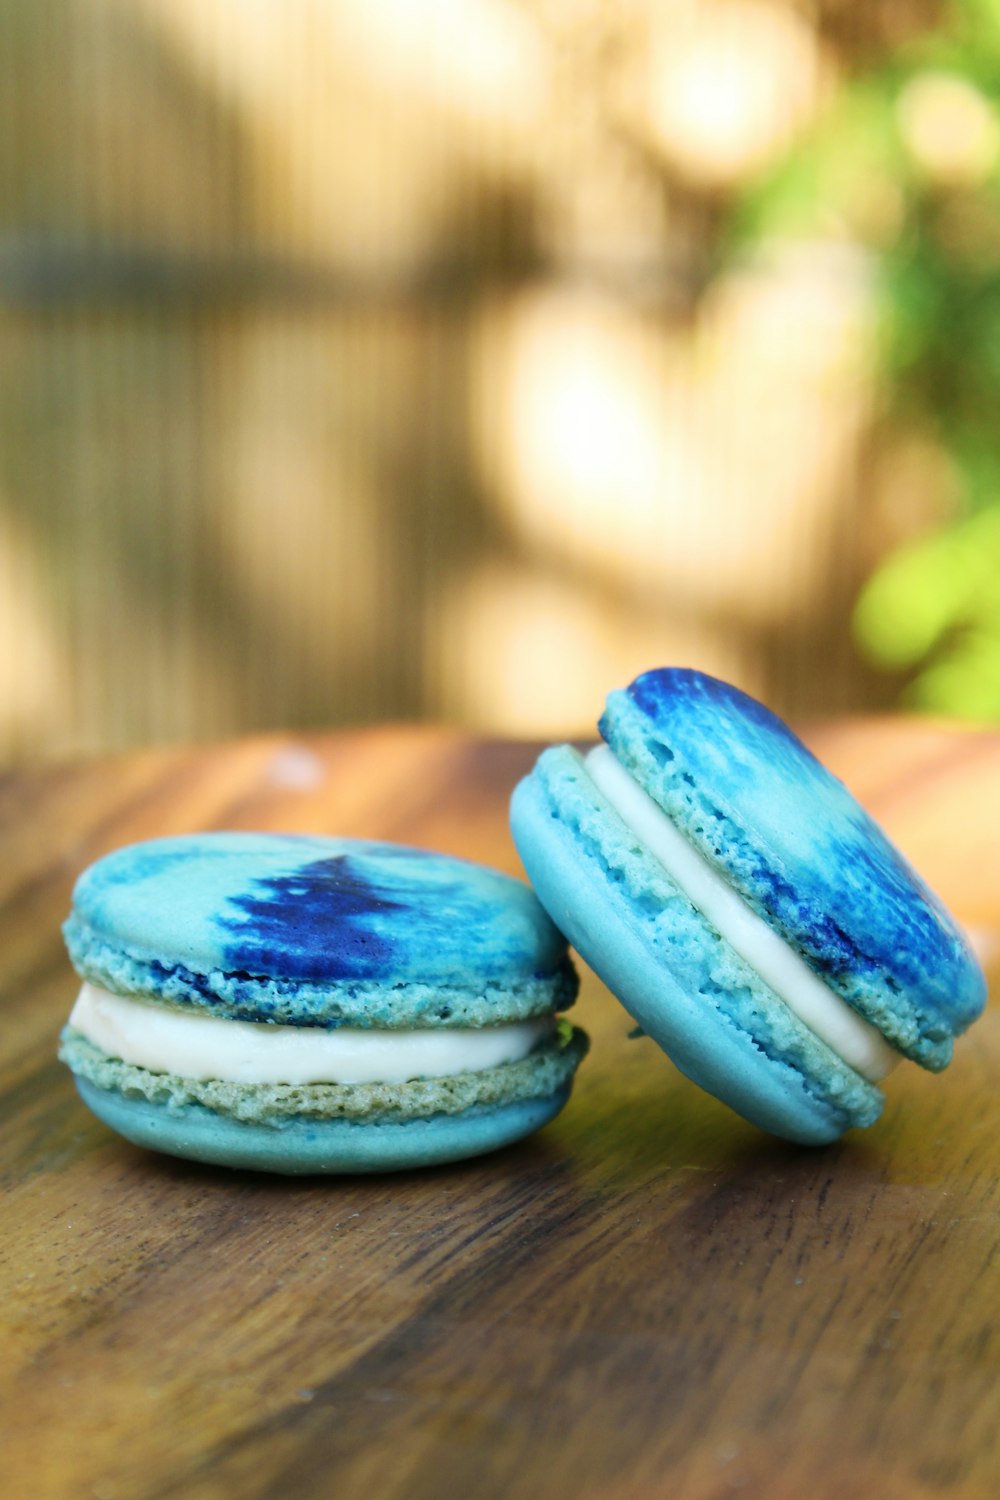 blue and white round cookies on brown wooden table